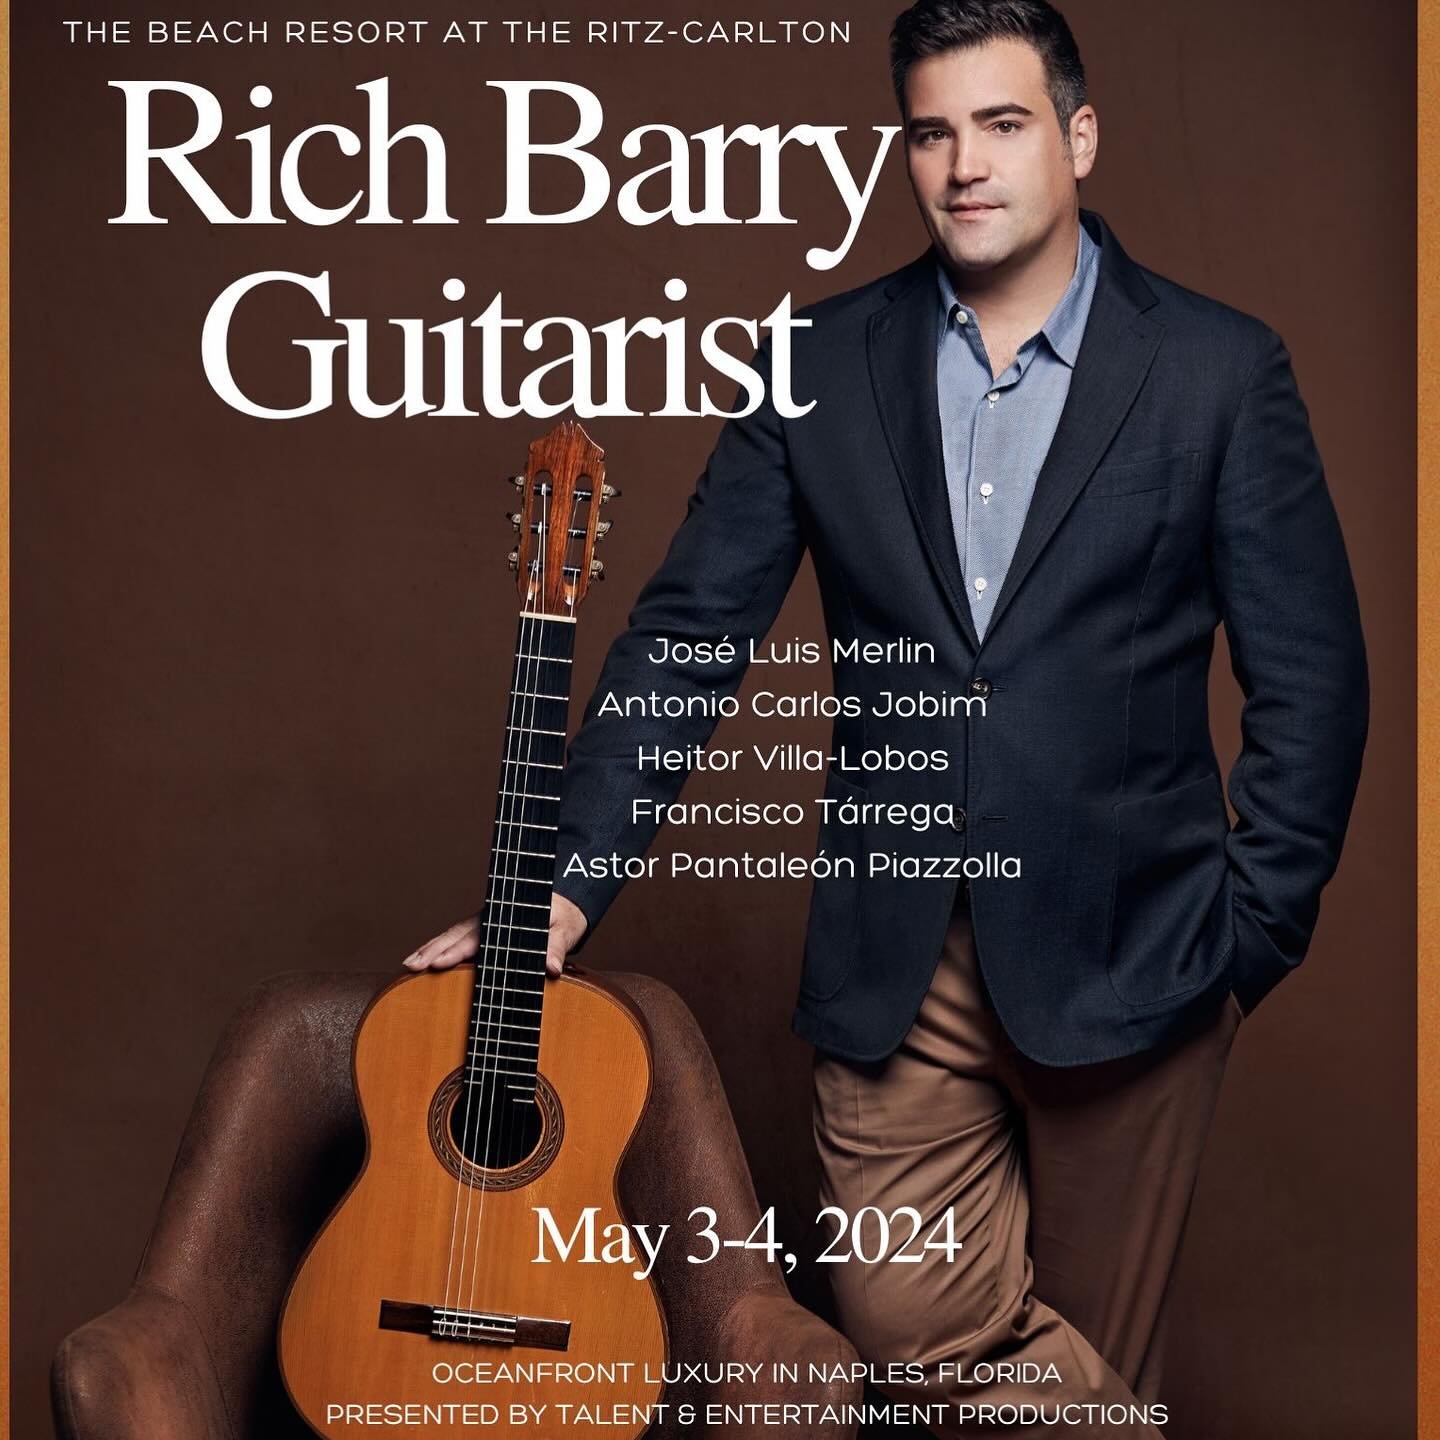 I will performing @ritzcarltonresortsofnaples in Florida several times in May. This weekend I will be performing in the lobby on Friday from 6:00 to 10:00 pm and at Ria on Saturday from 5:30 - 8:30 pm. 

Thank you Talent &amp; Entertainment Productio